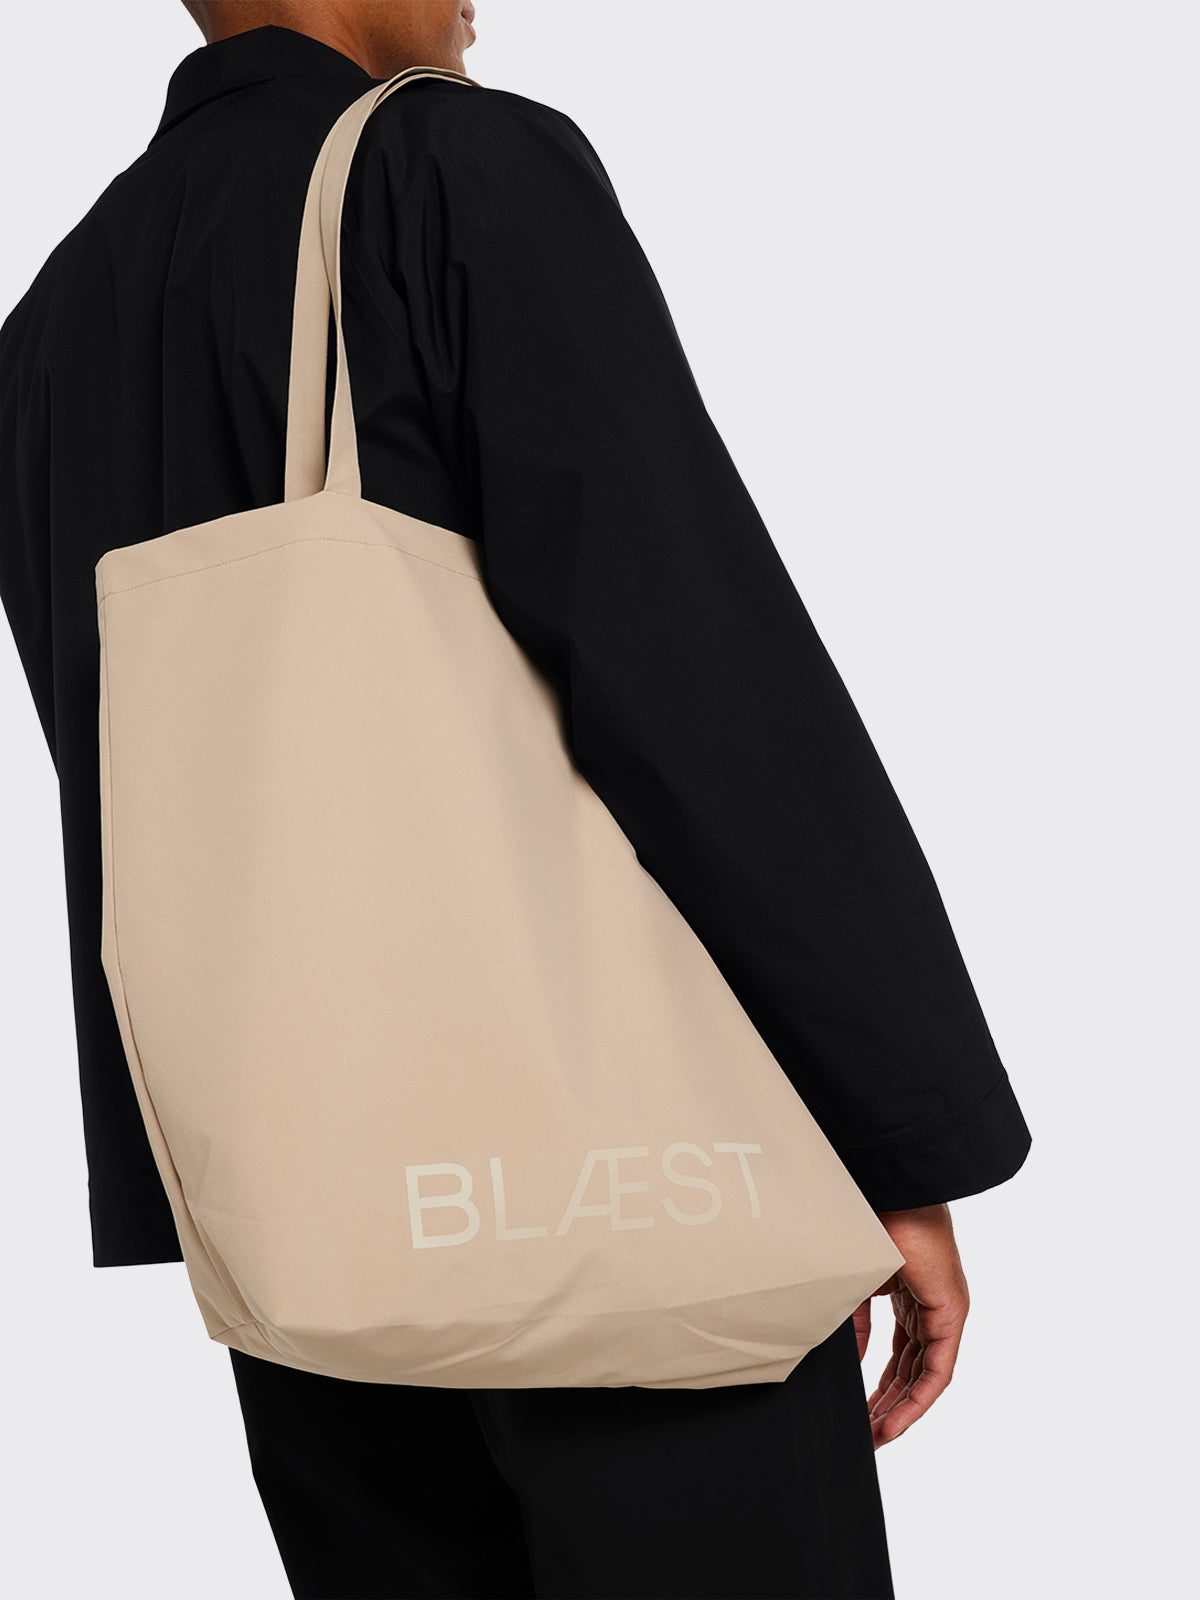 Moa tote bag in Beige from Blæst